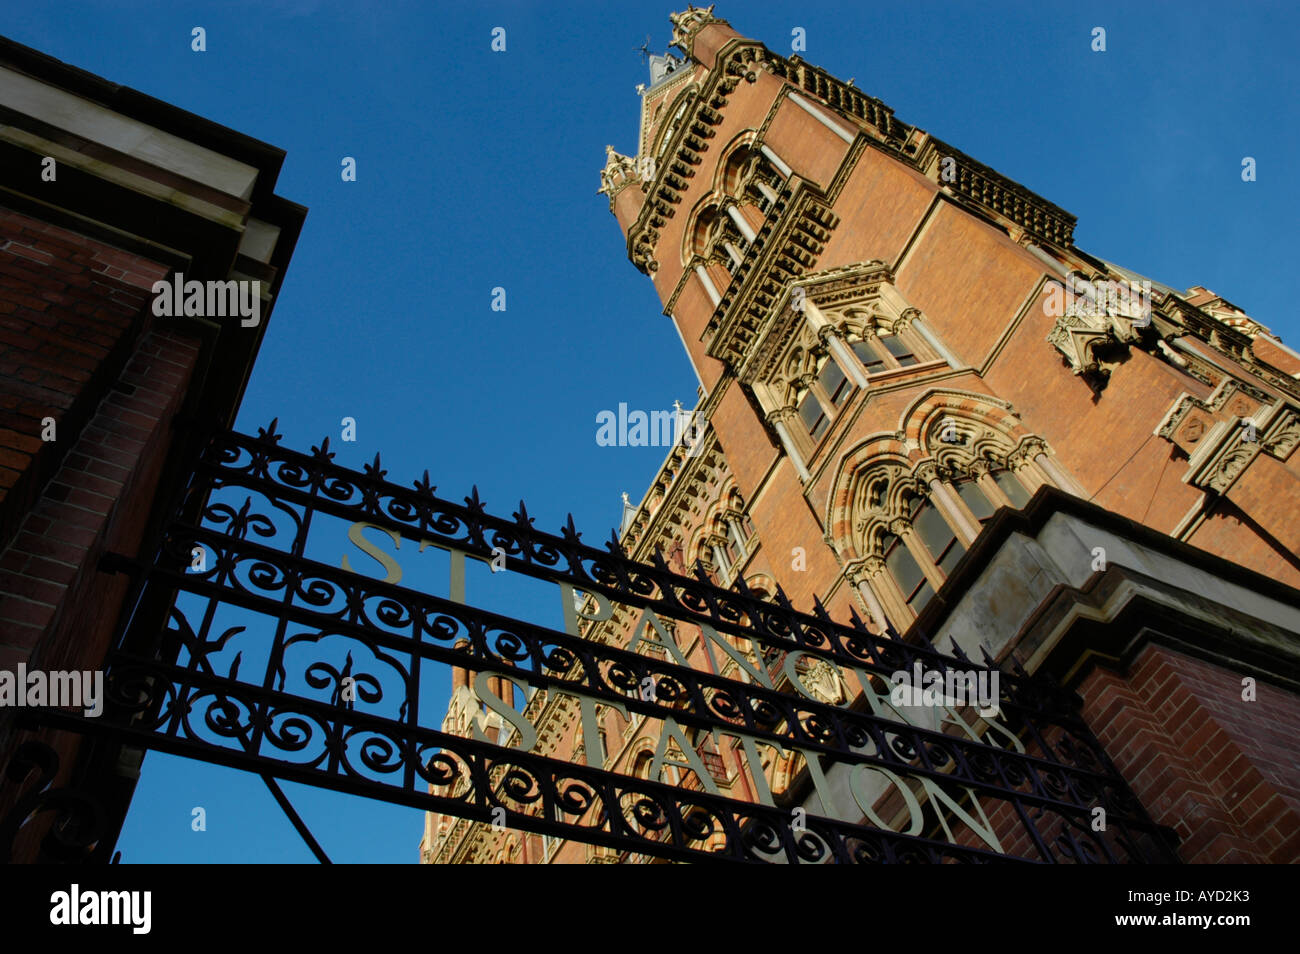 View looking up at the newly restored exterior of St Pancras International railway London England UK 2007. Stock Photo